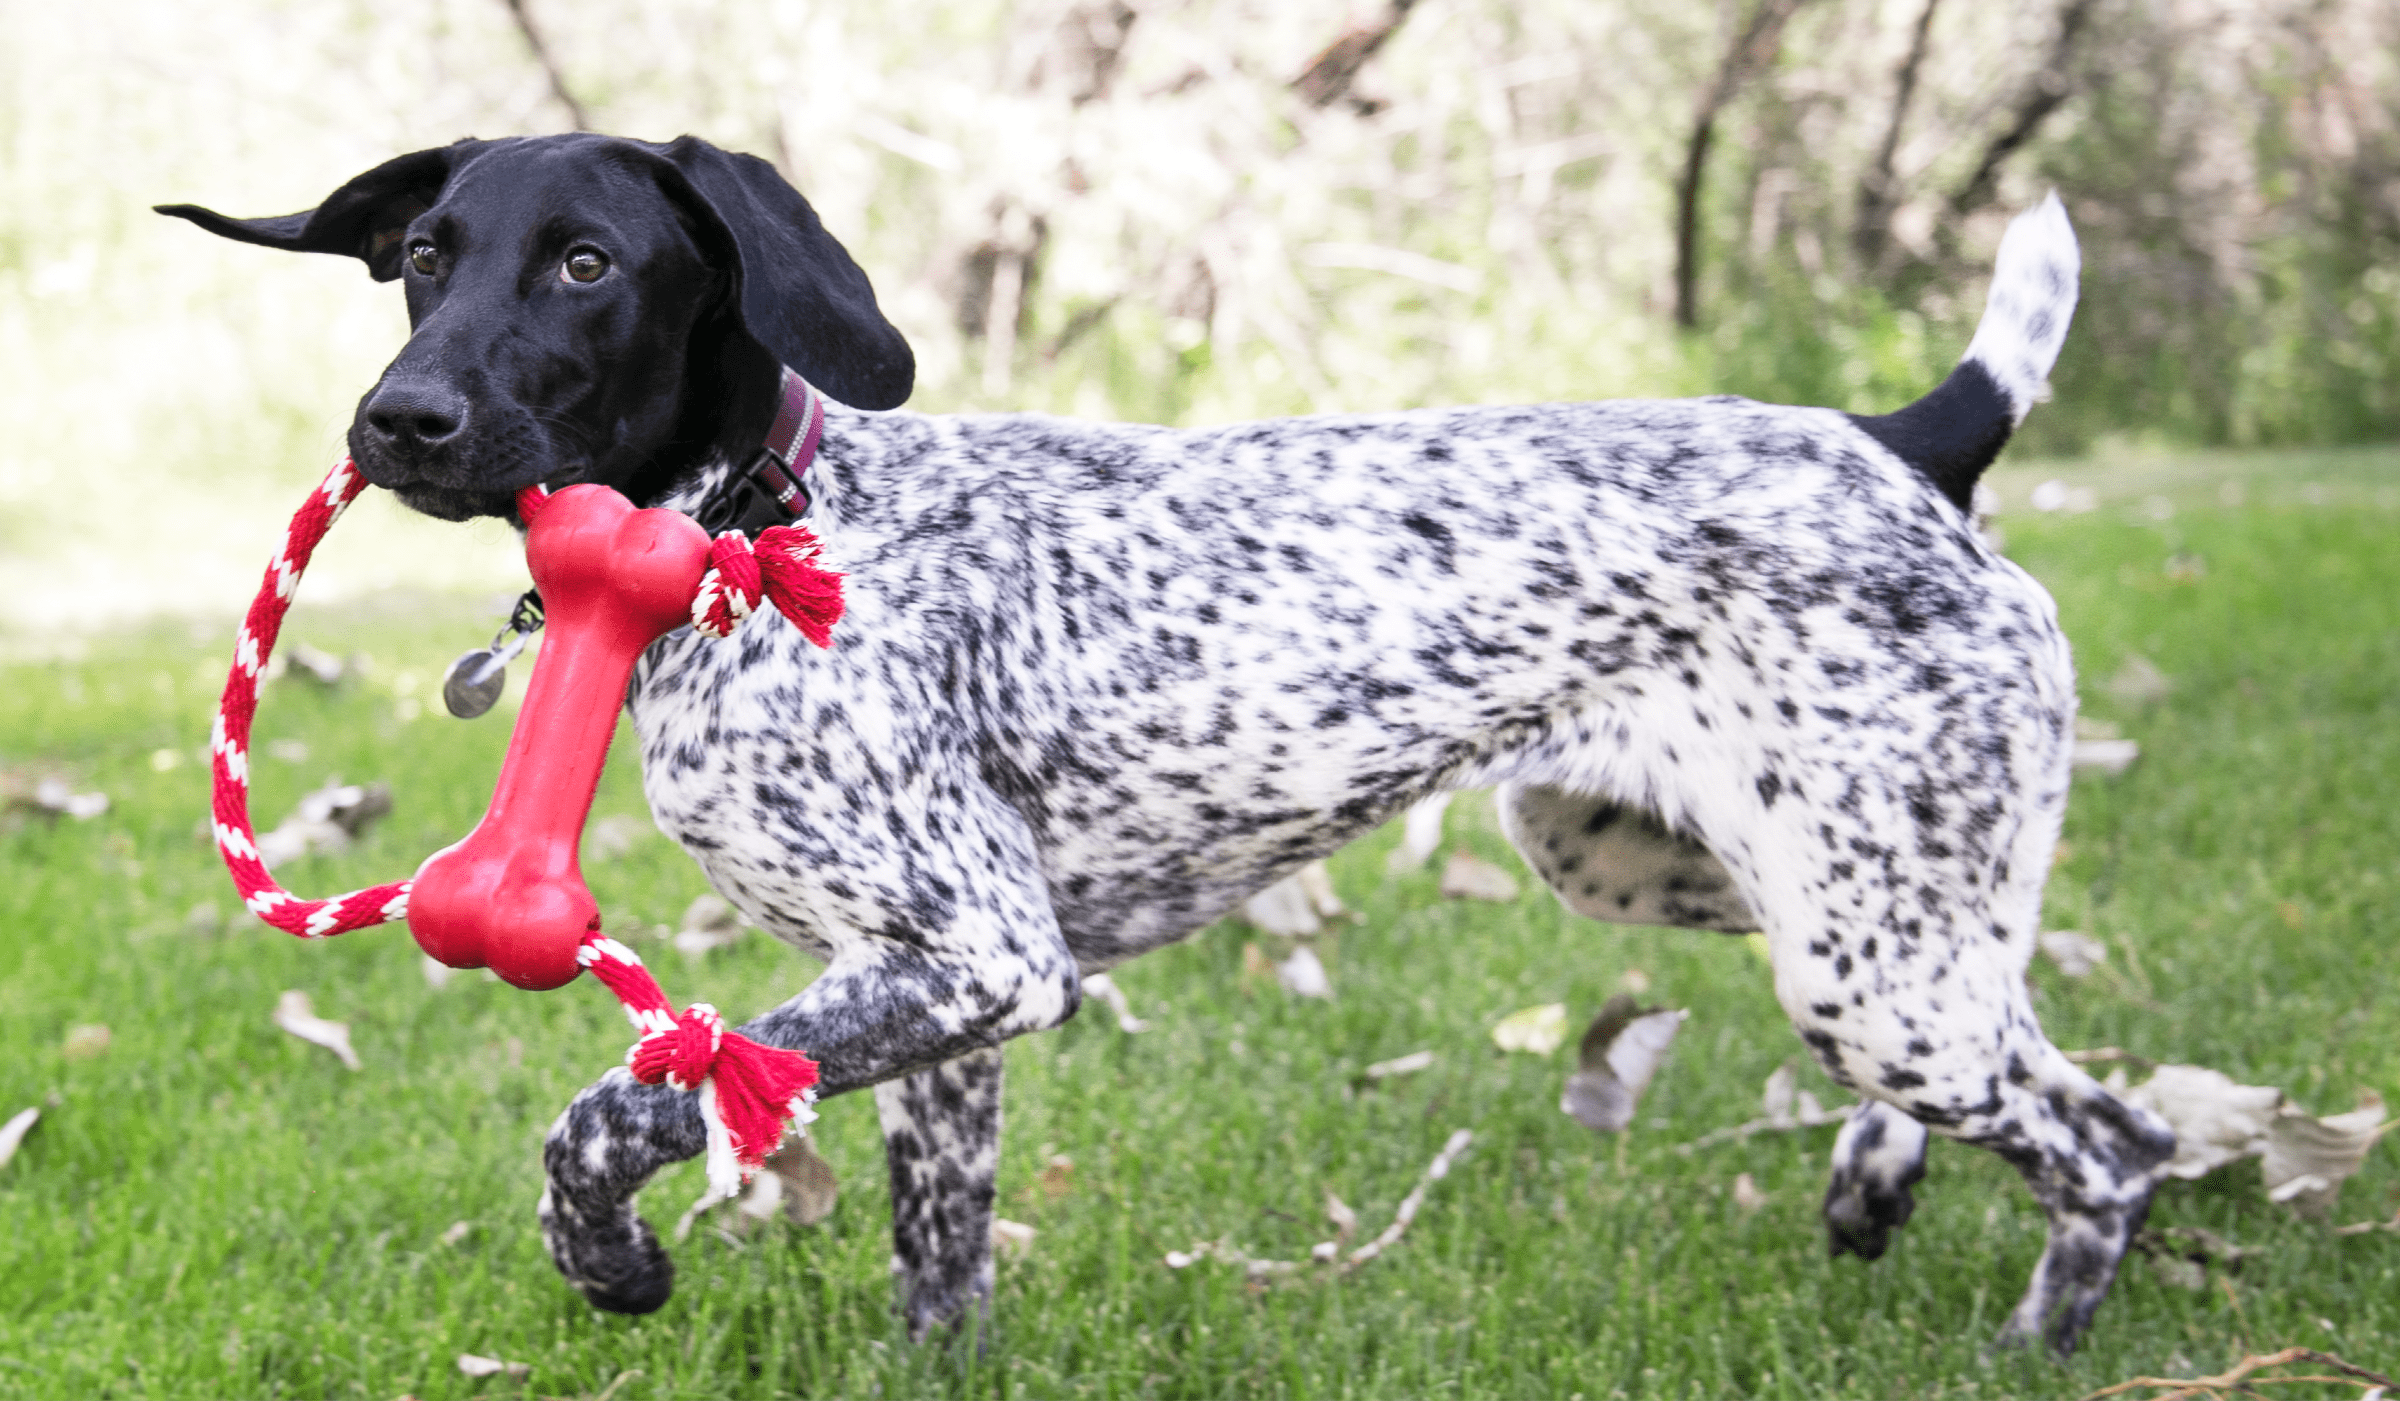 A black and white dog carrying a KONG tug toy through a field representing the Let's Play category..